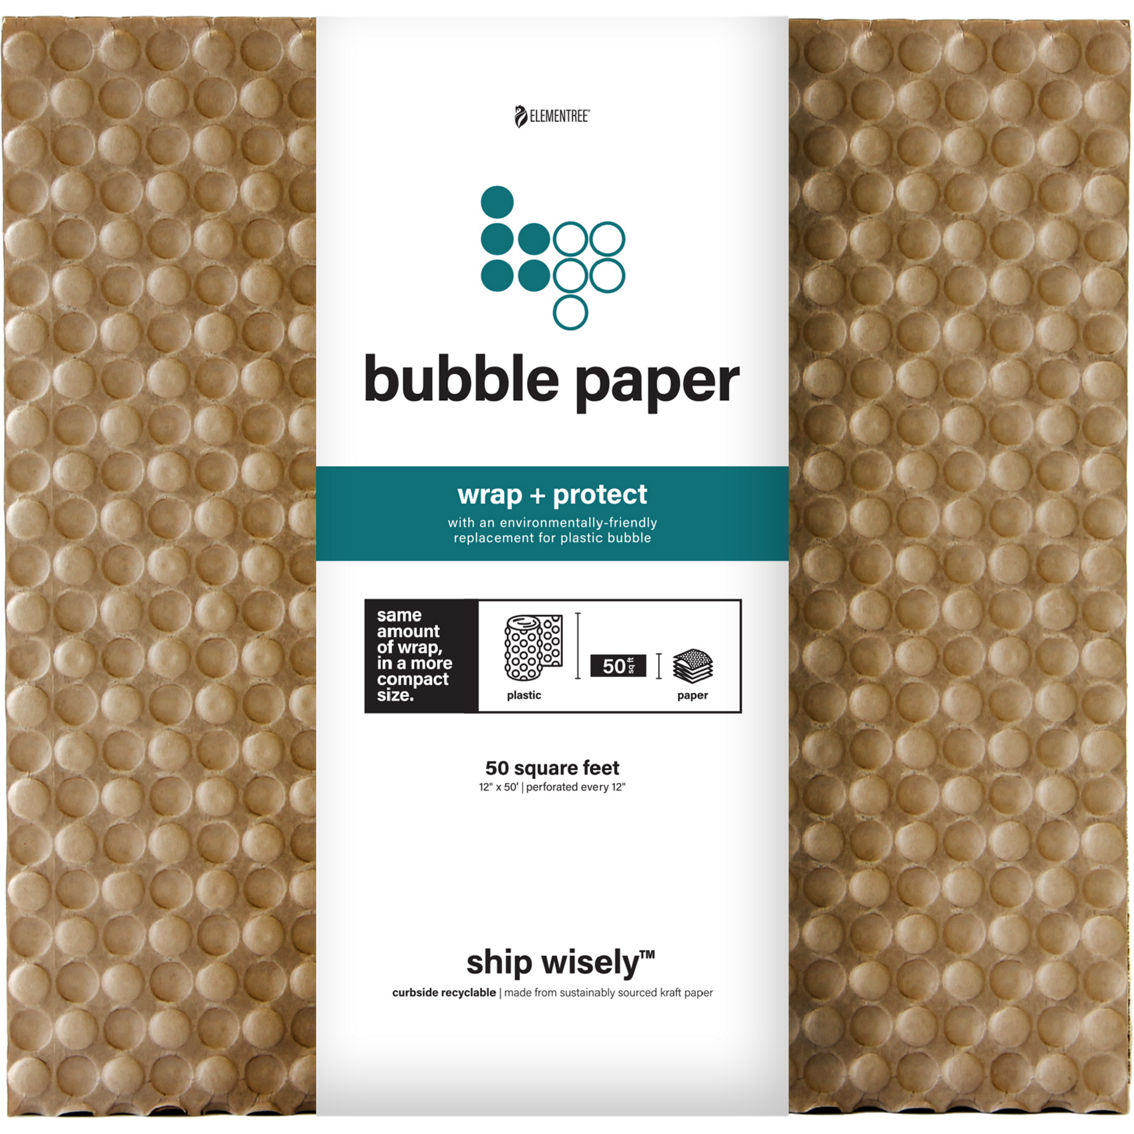 Paris Paper Bubble Wrap Fanfold Packing Paper 50 Ft., Paper Products, Household